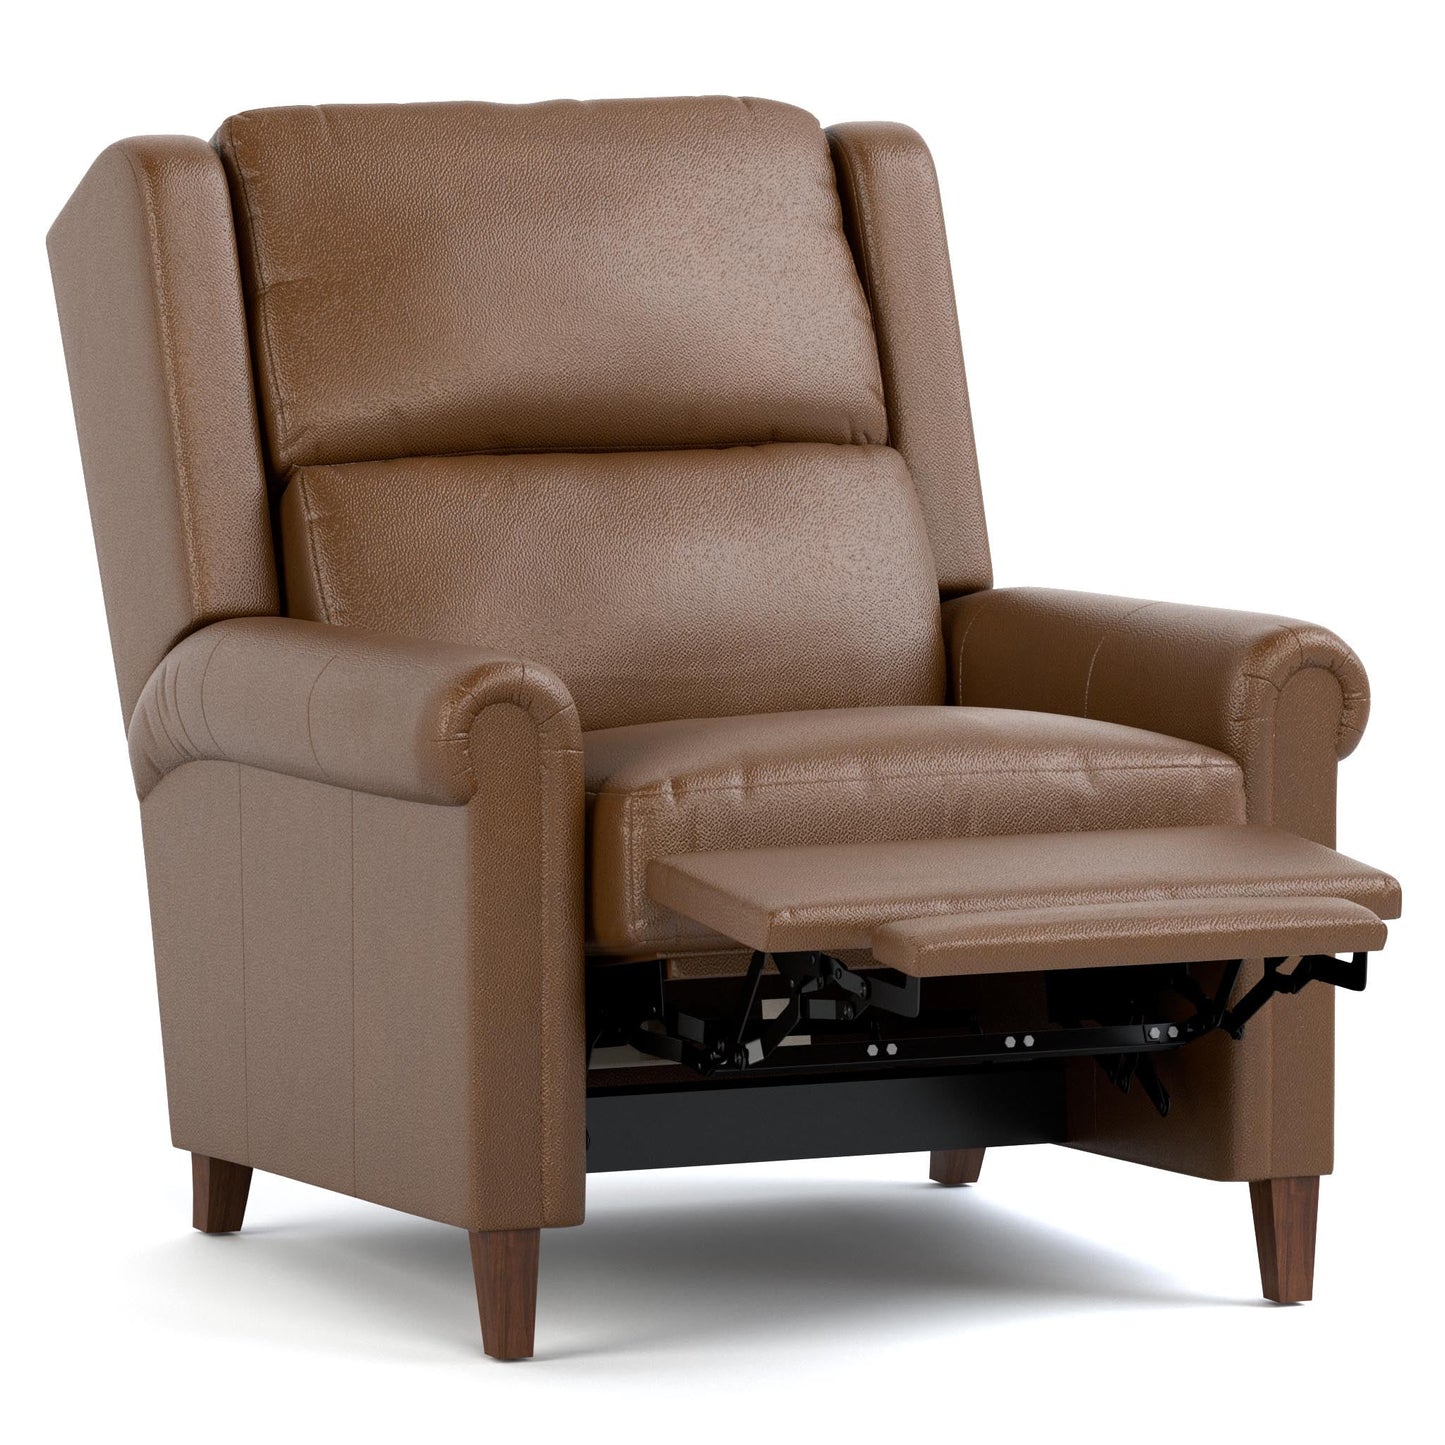 Woodlands Small Roll Arm Power Recliner Selvano Bark - Angle Reclined